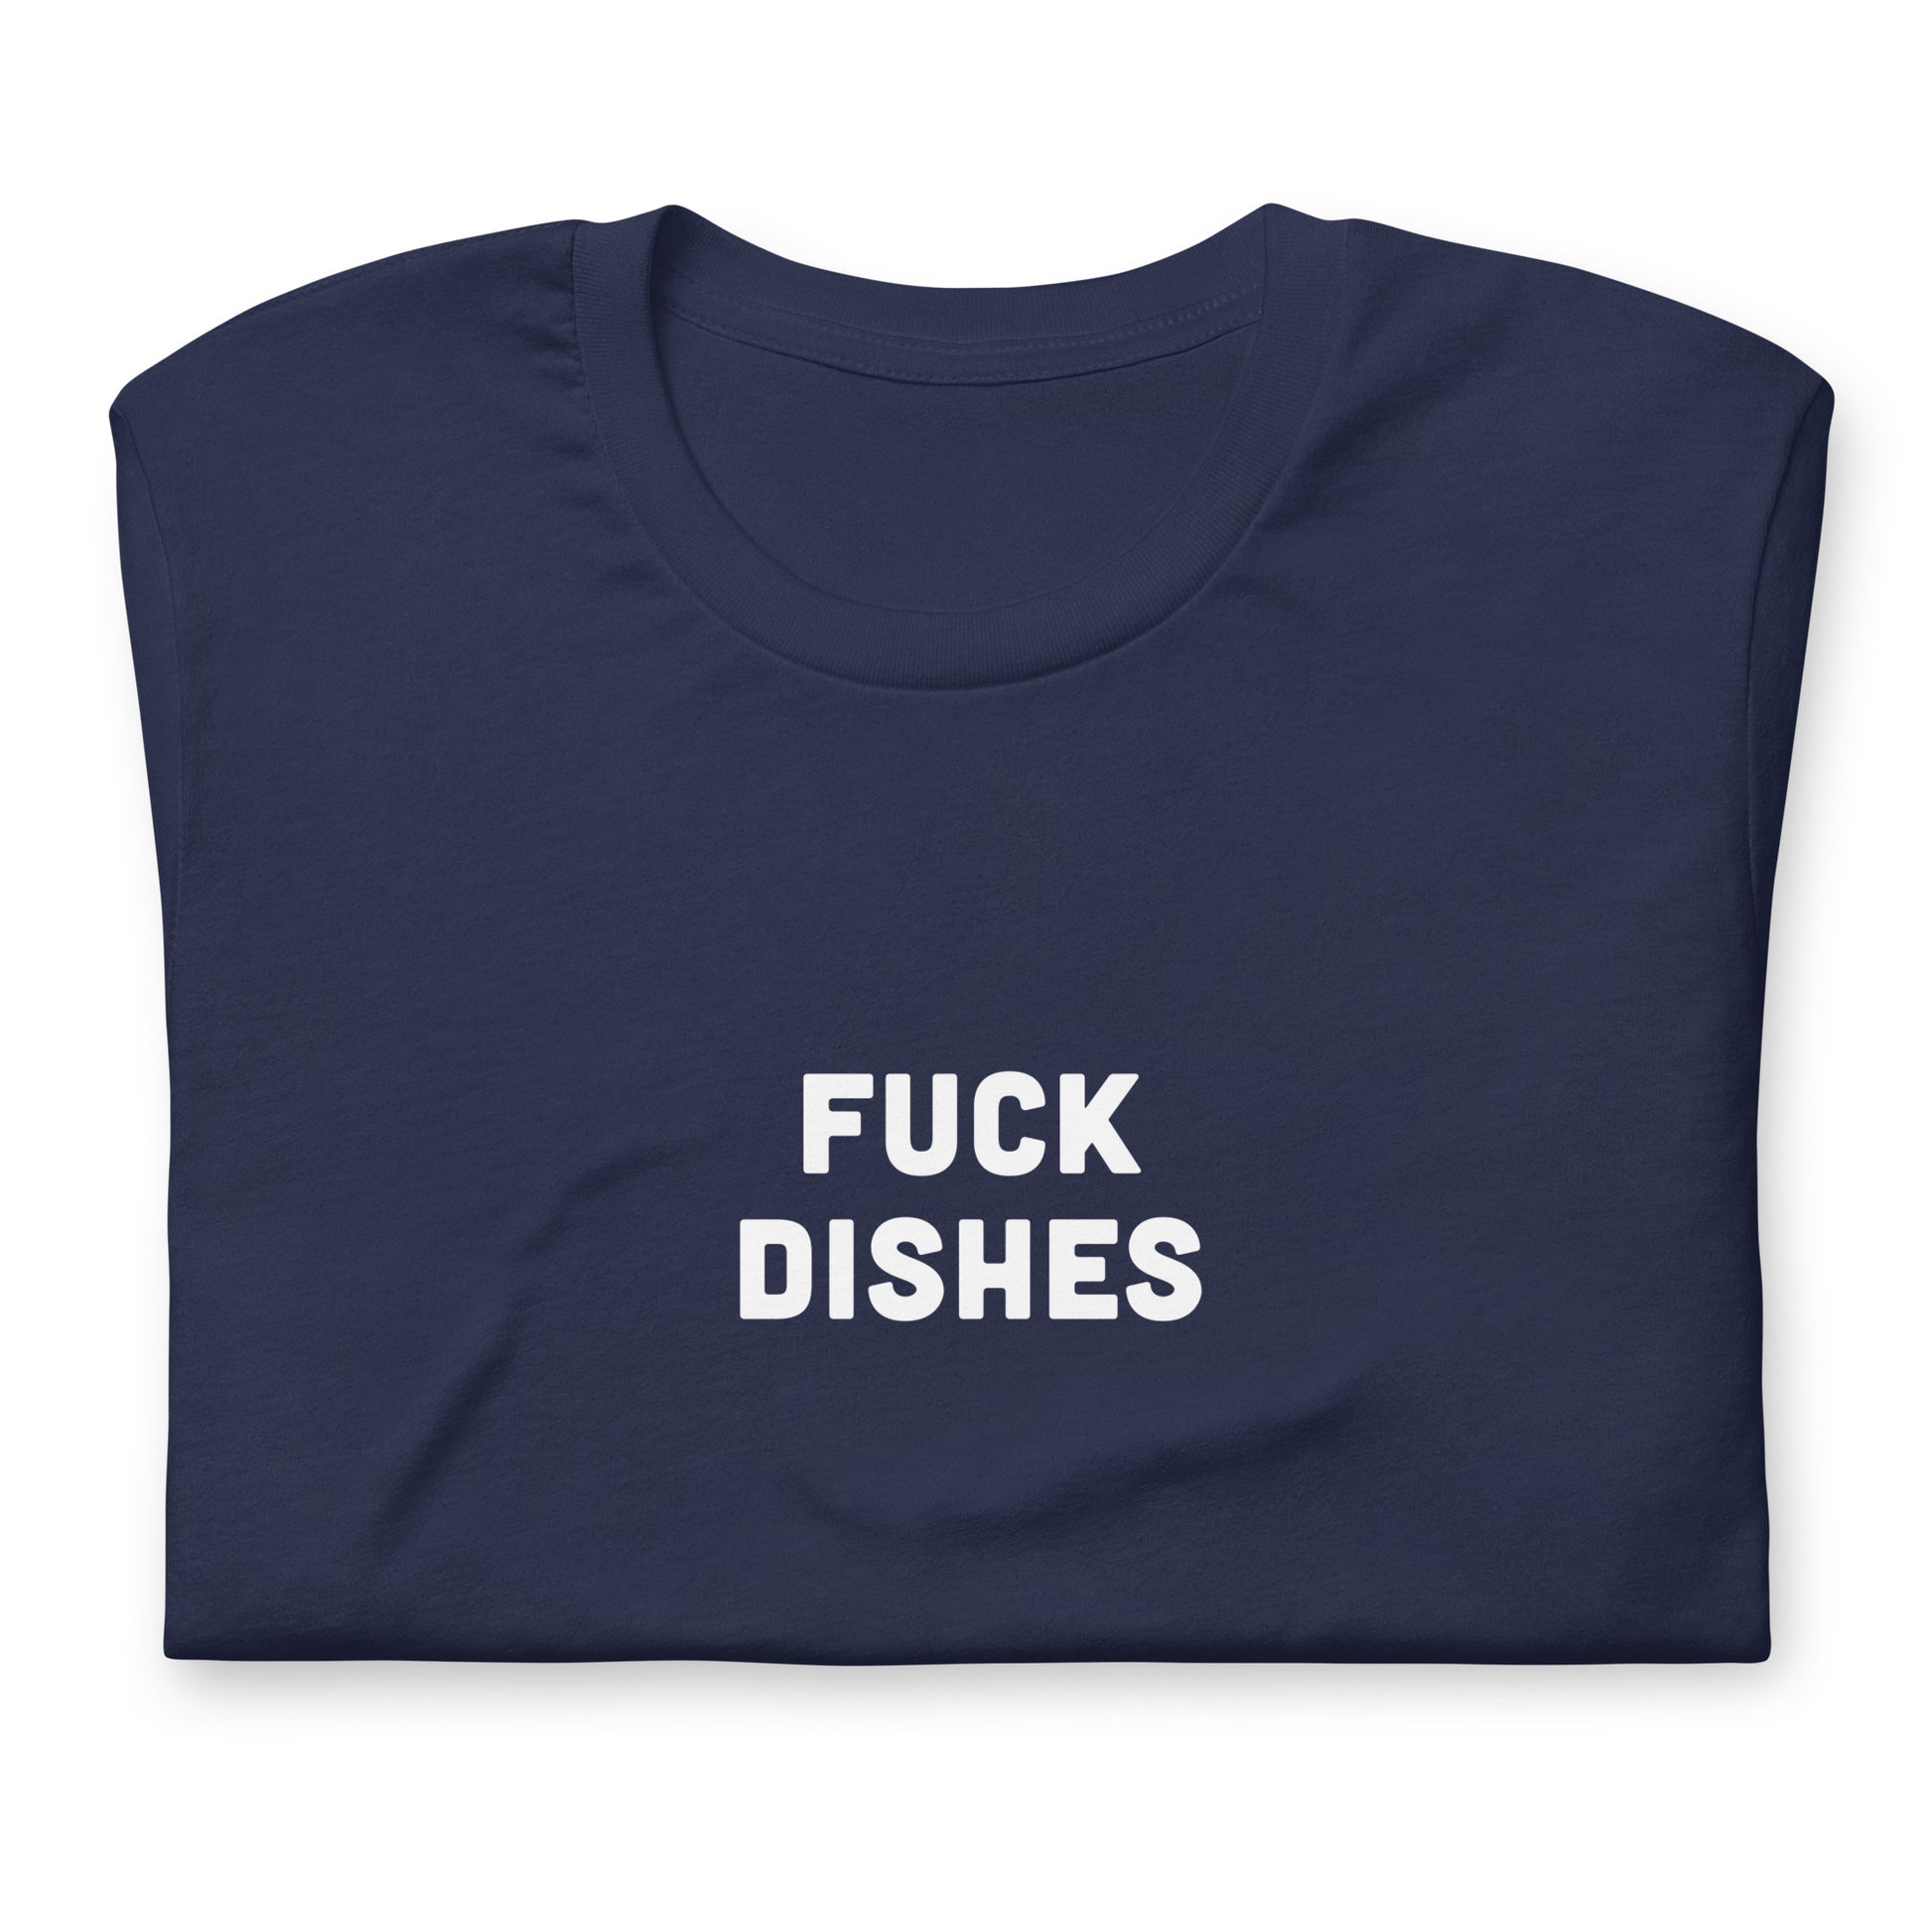 Fuck Dishes T-Shirt Size XL Color Black